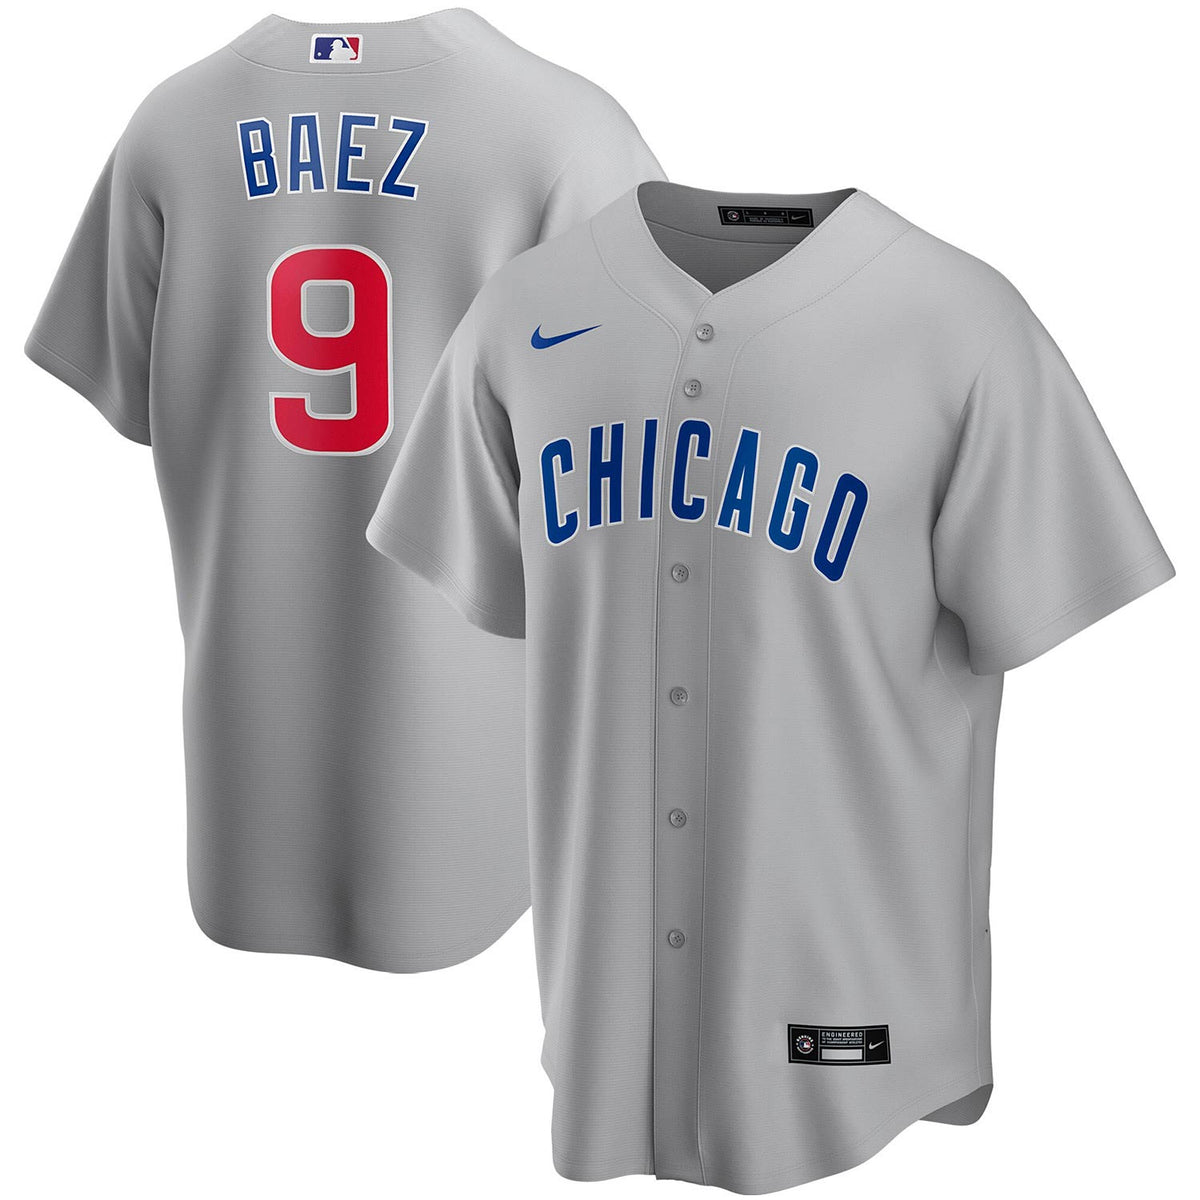 Chicago Cubs Nike Authentic Road Jersey 52 = XX-Large